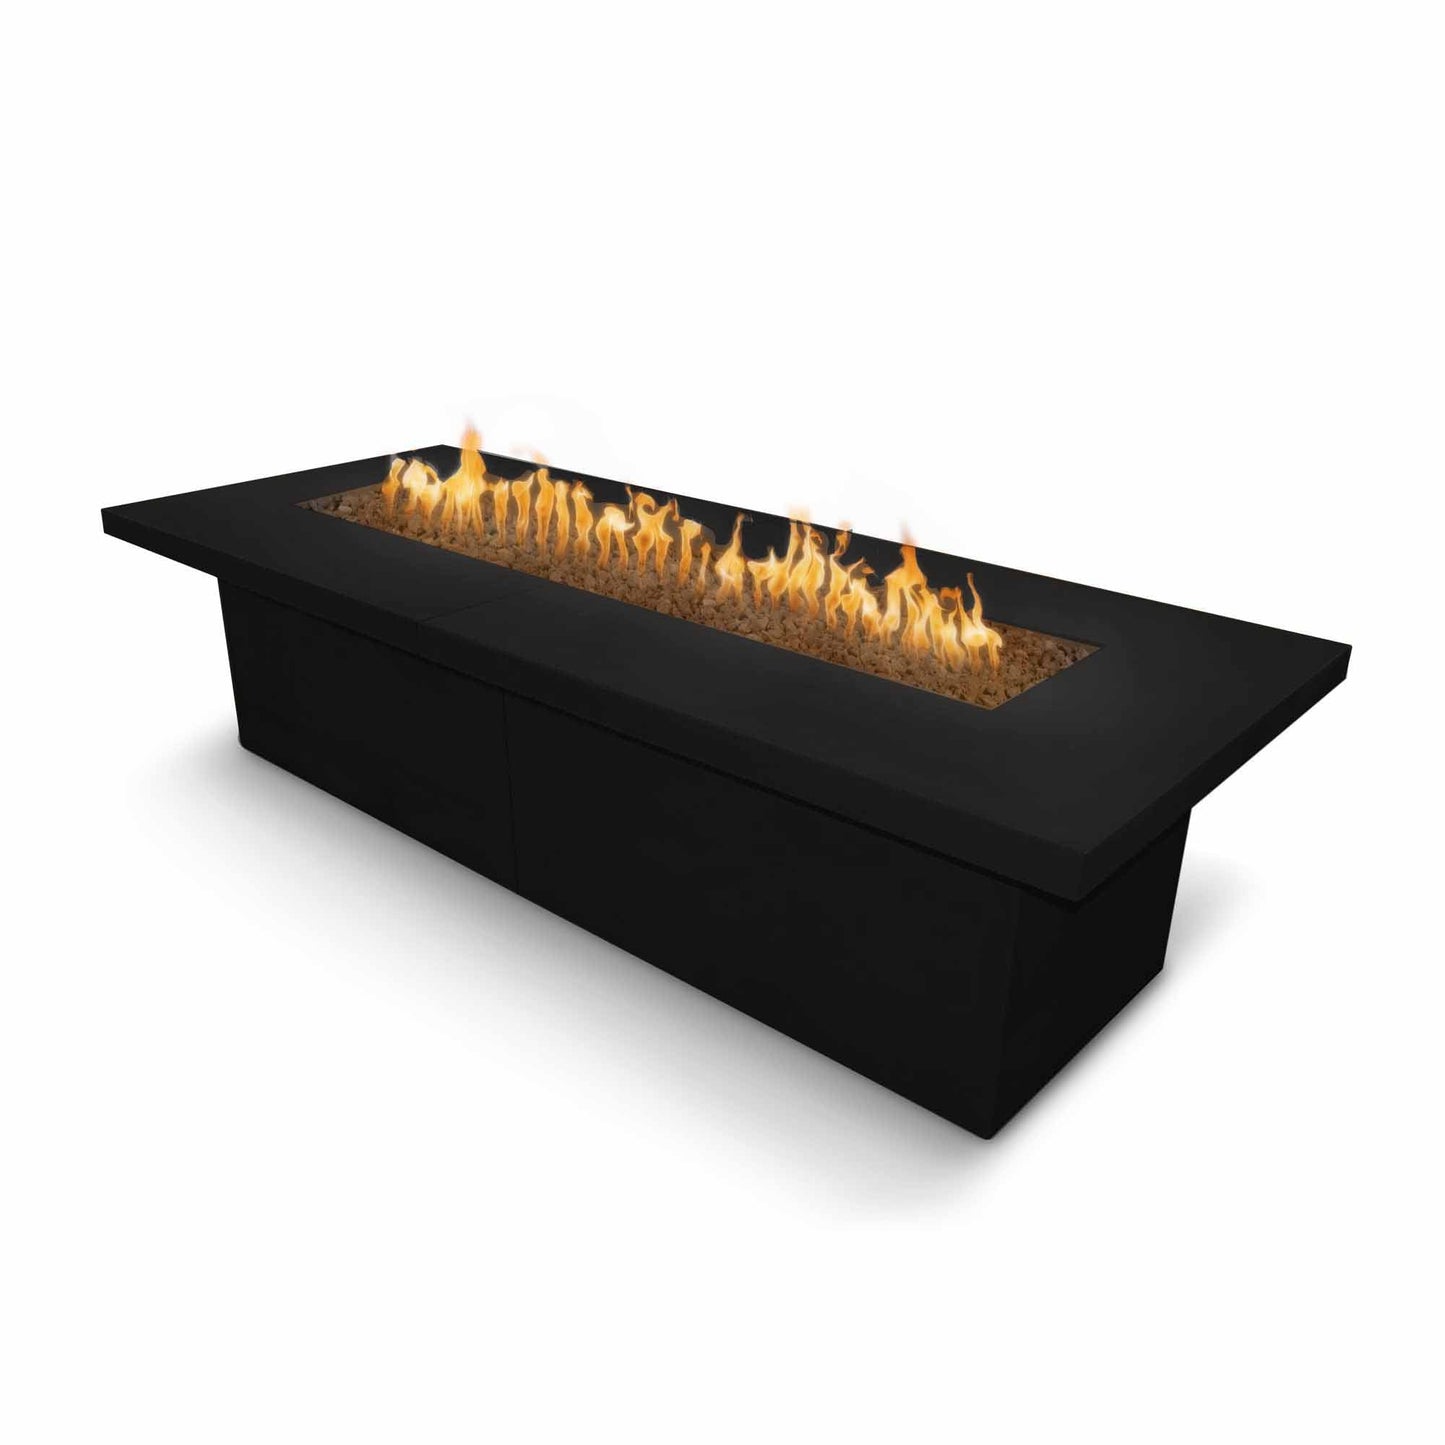 The Outdoor Plus Rectangular Newport 144" Java Powder Coated Metal Liquid Propane Fire Pit with Flame Sense with Spark Ignition